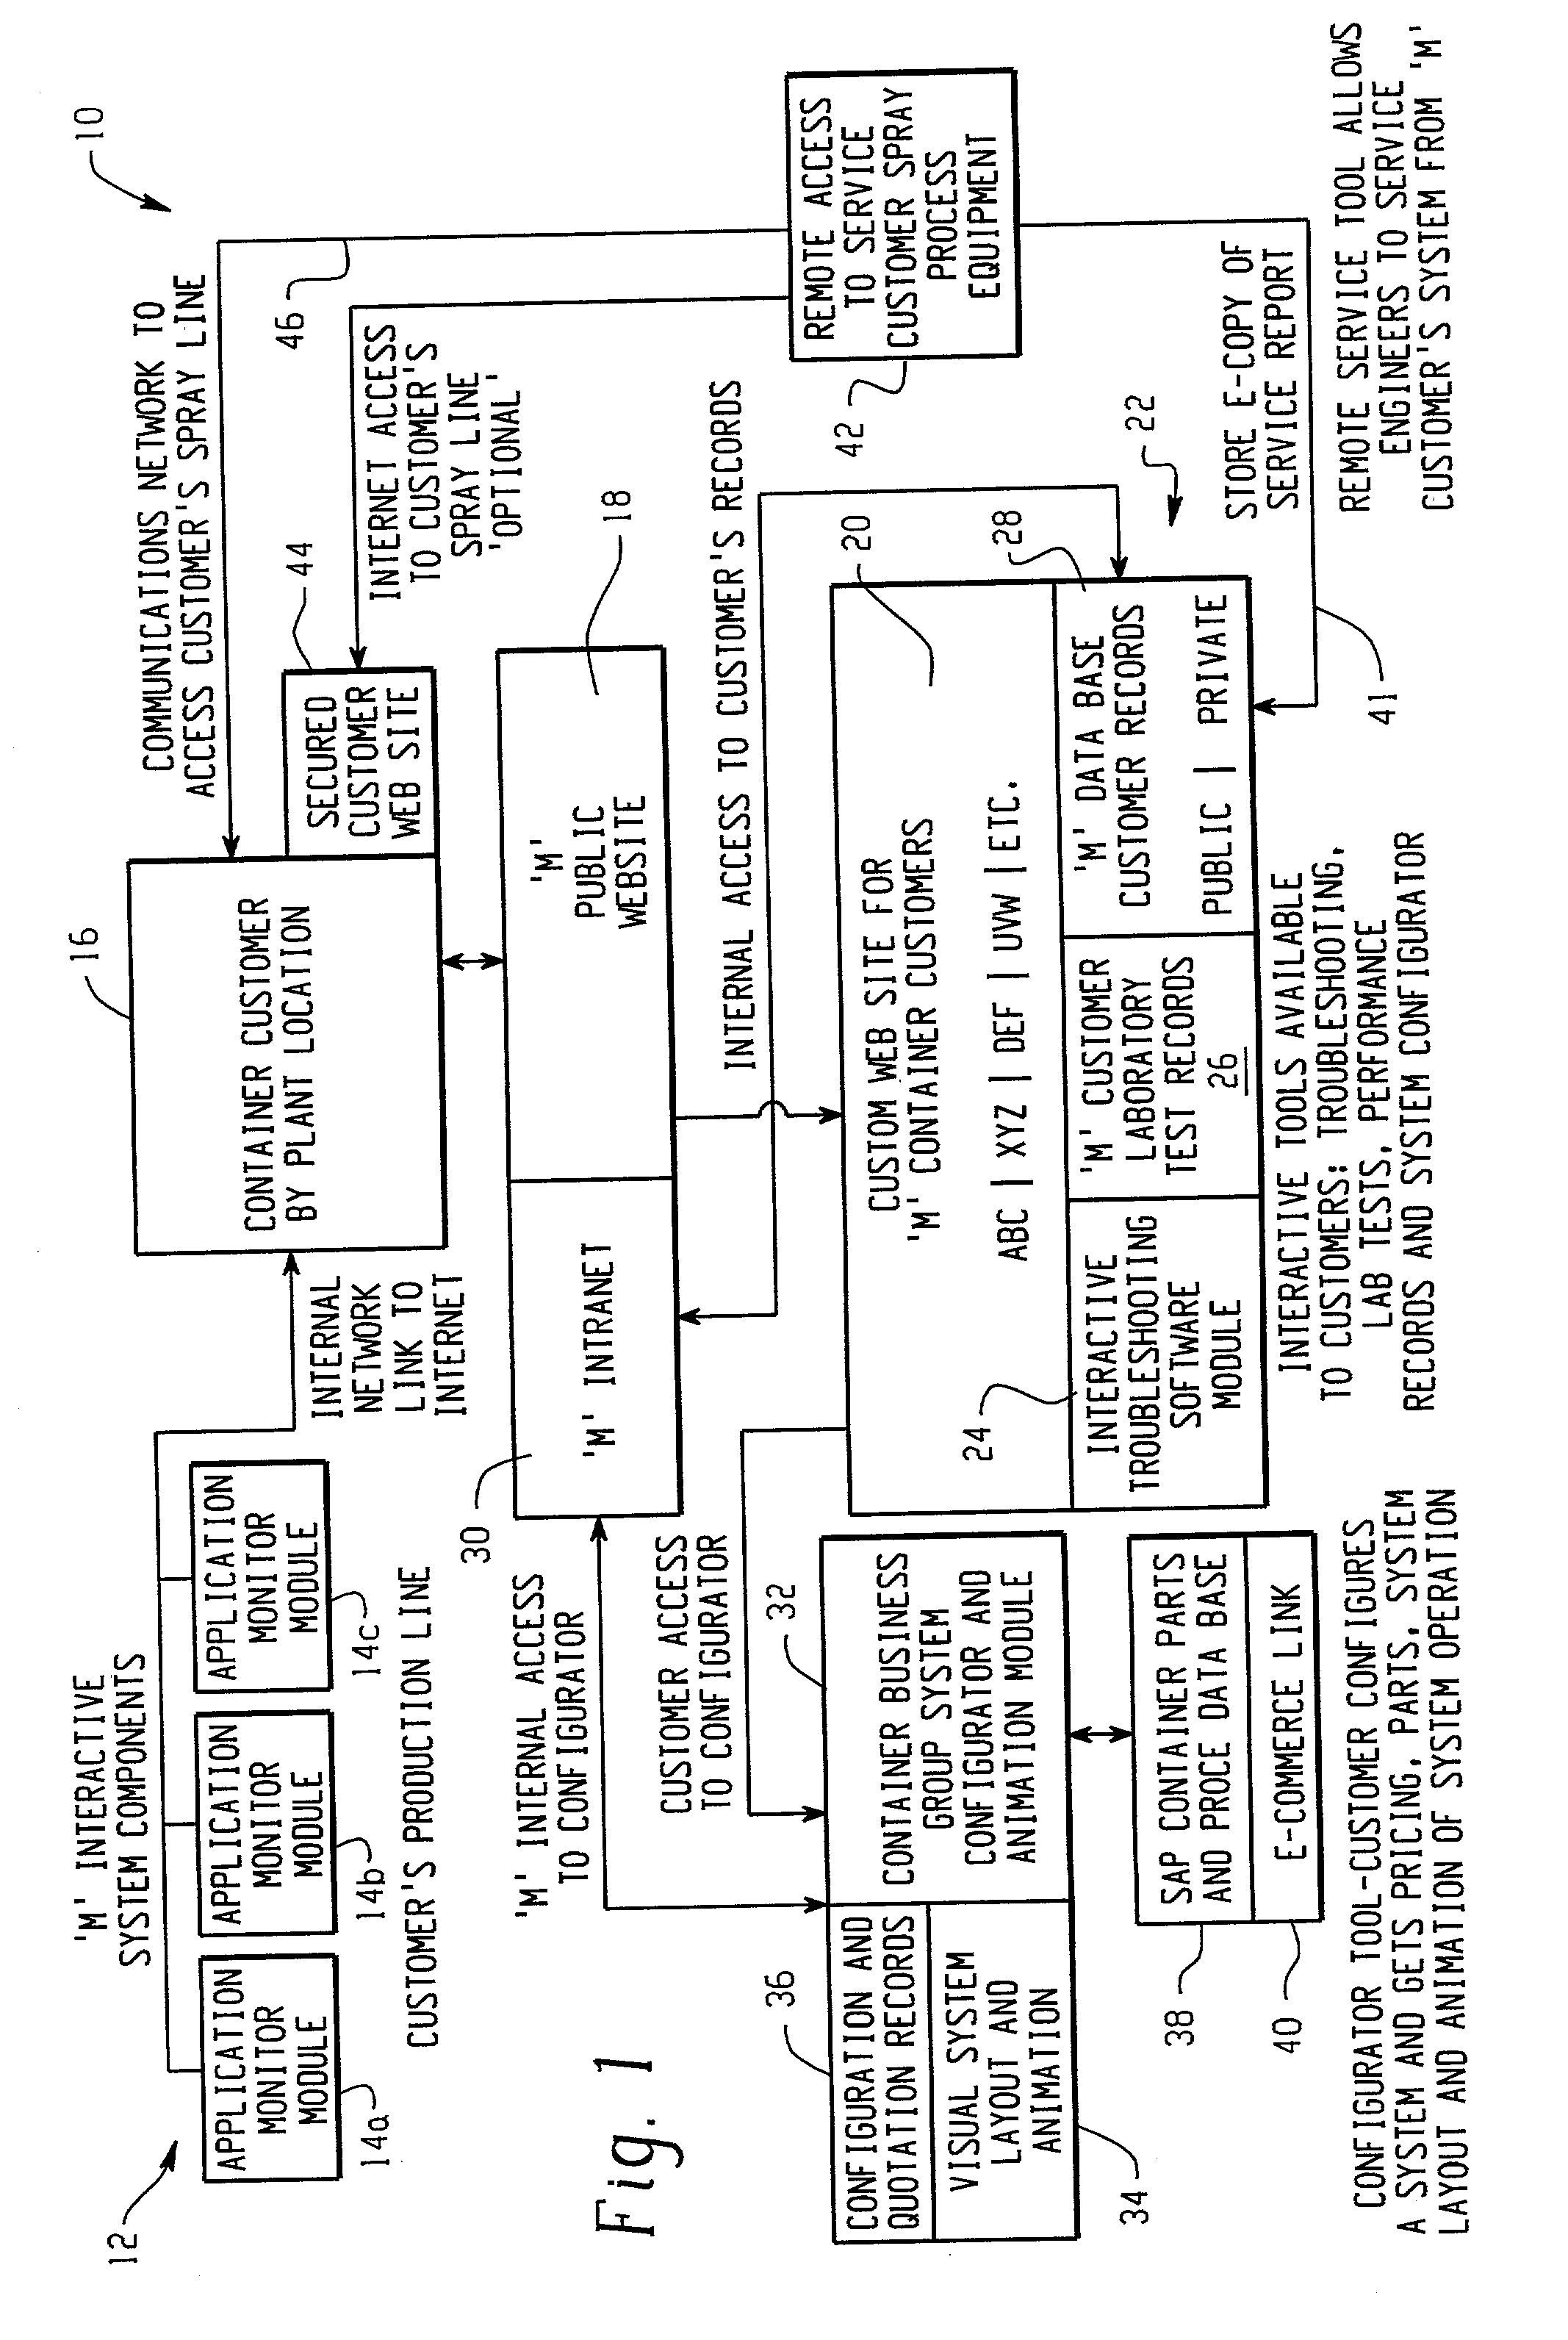 Apparatus and method for configuring, installing and monitoring spray coating application systems